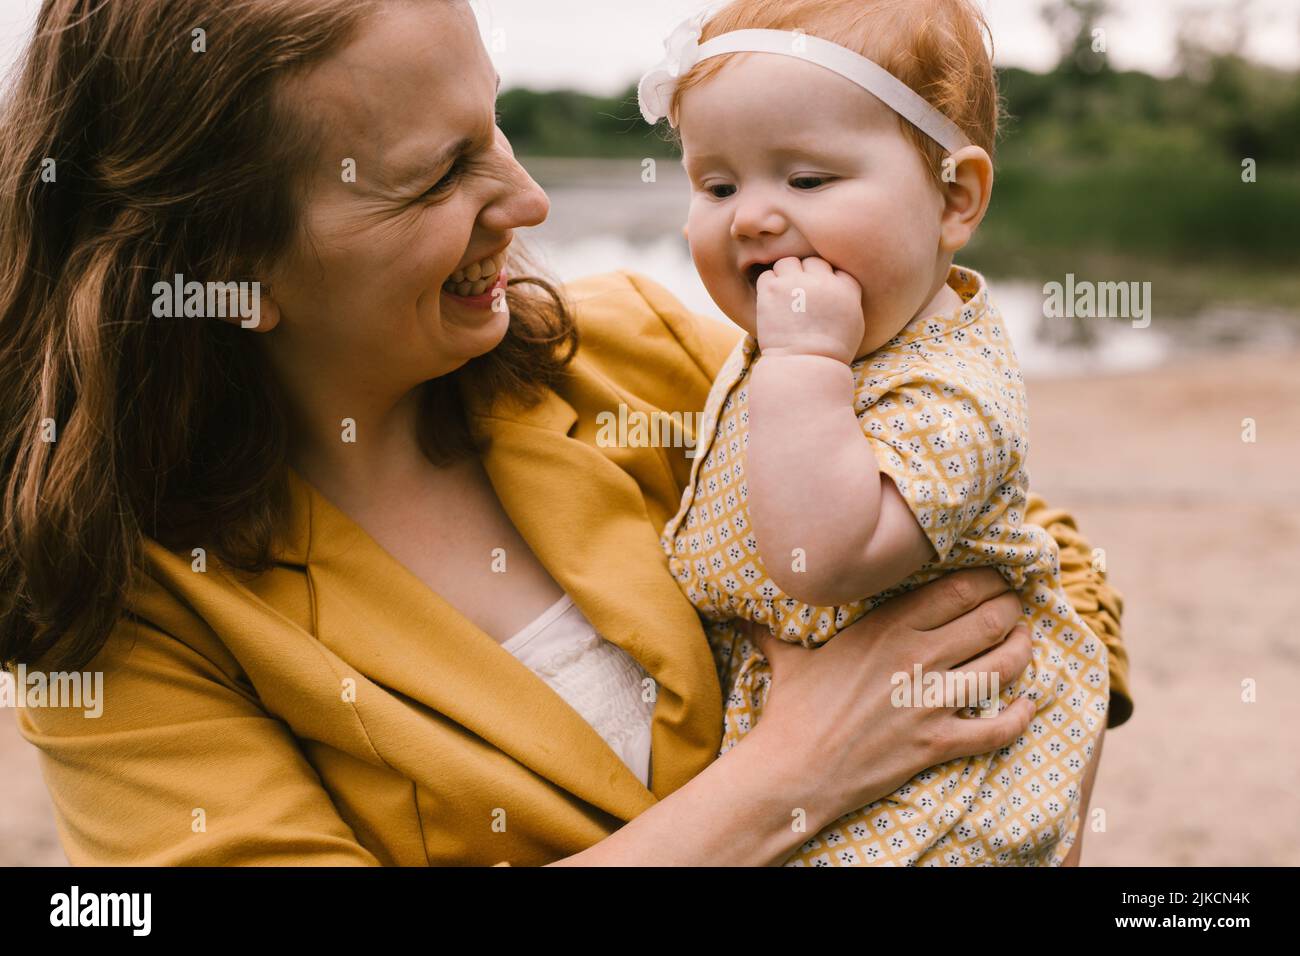 Mother laughs and smiles at red head baby daughter Stock Photo